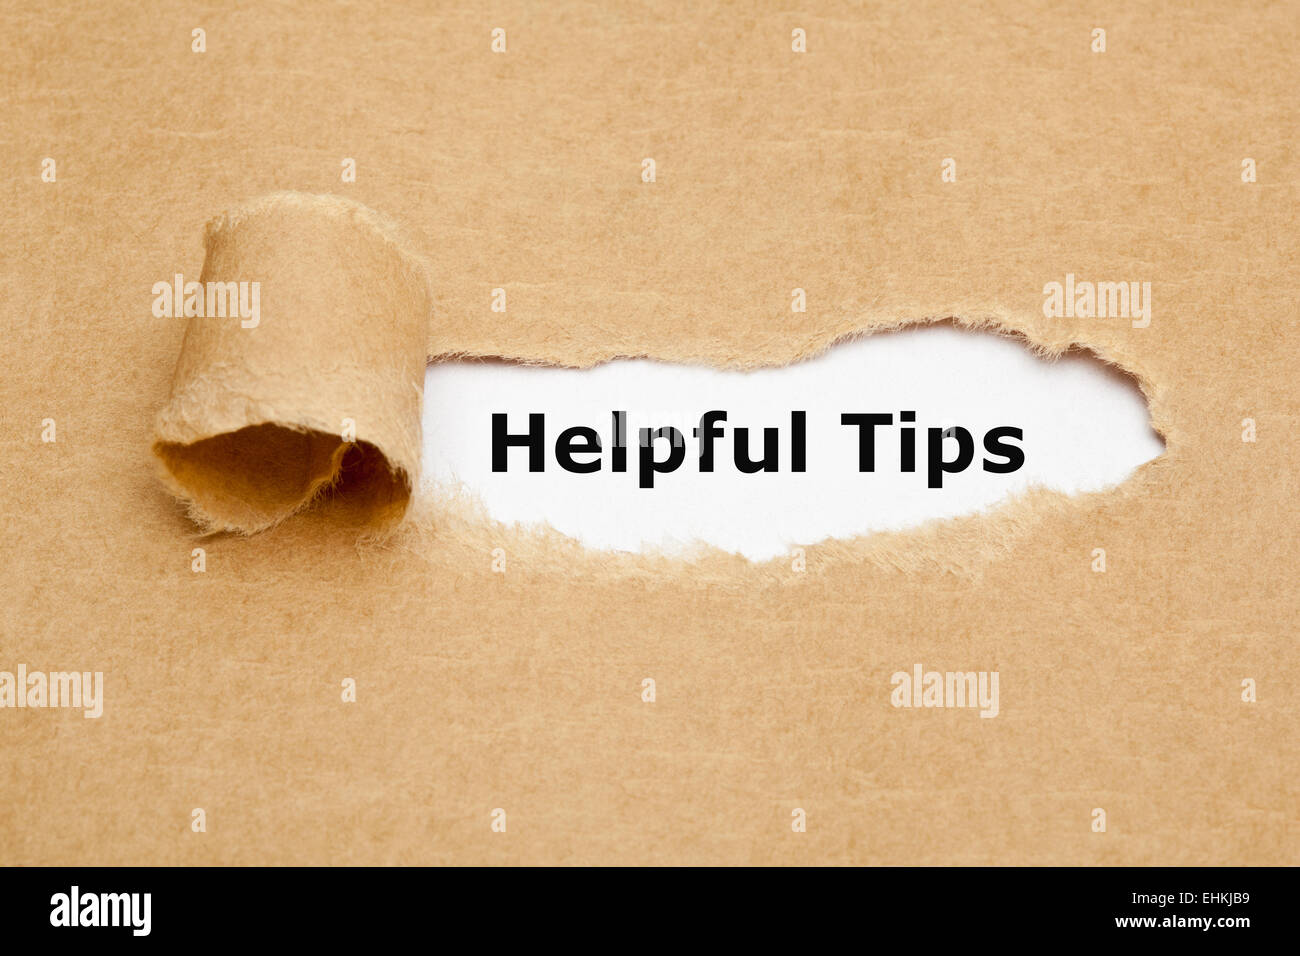 The text Helpful Tips appearing behind torn brown paper. Stock Photo